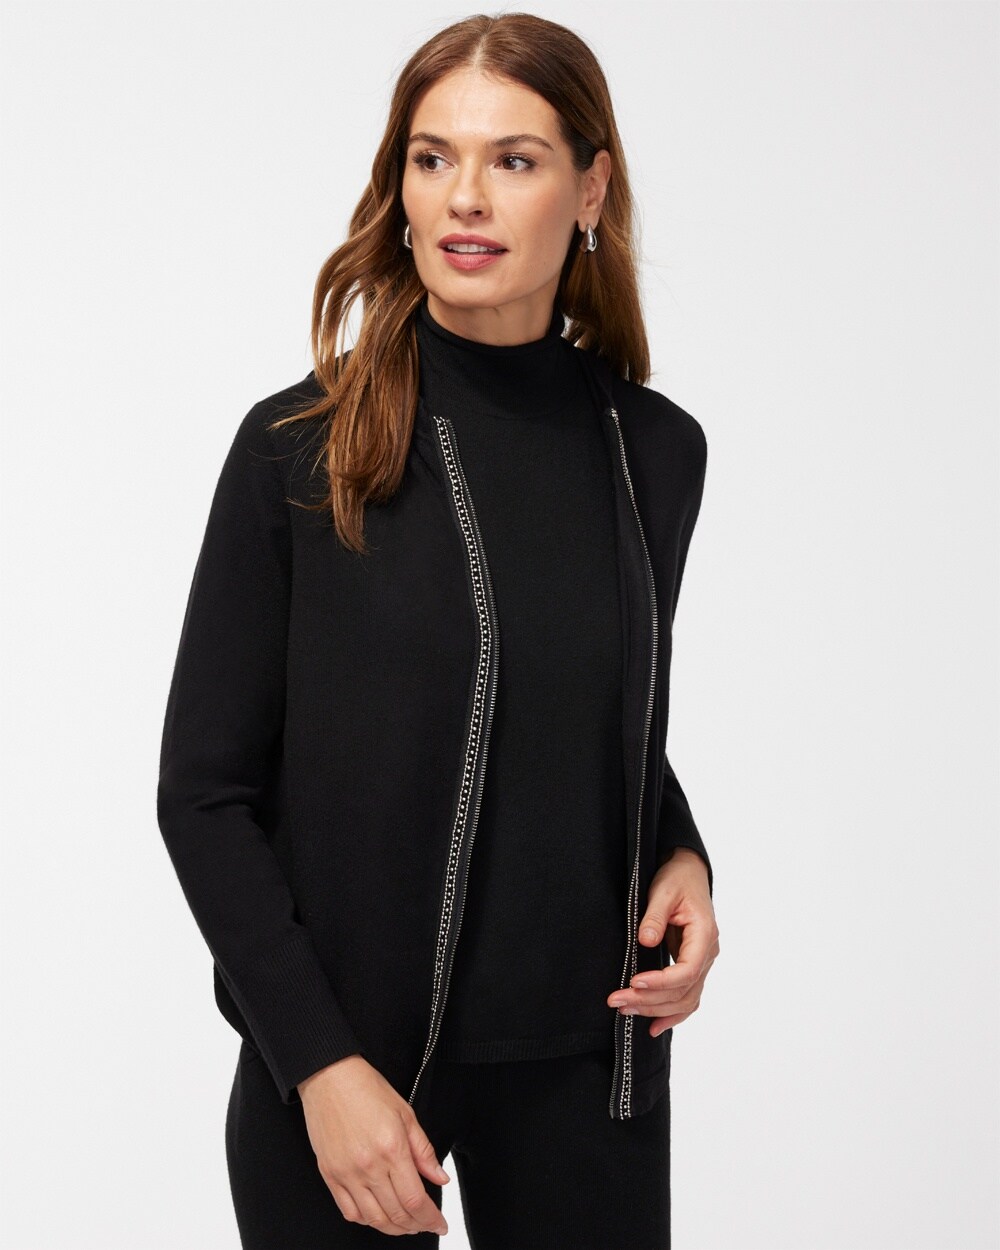 Zenergy Luxe Cashmere Blend Sweater